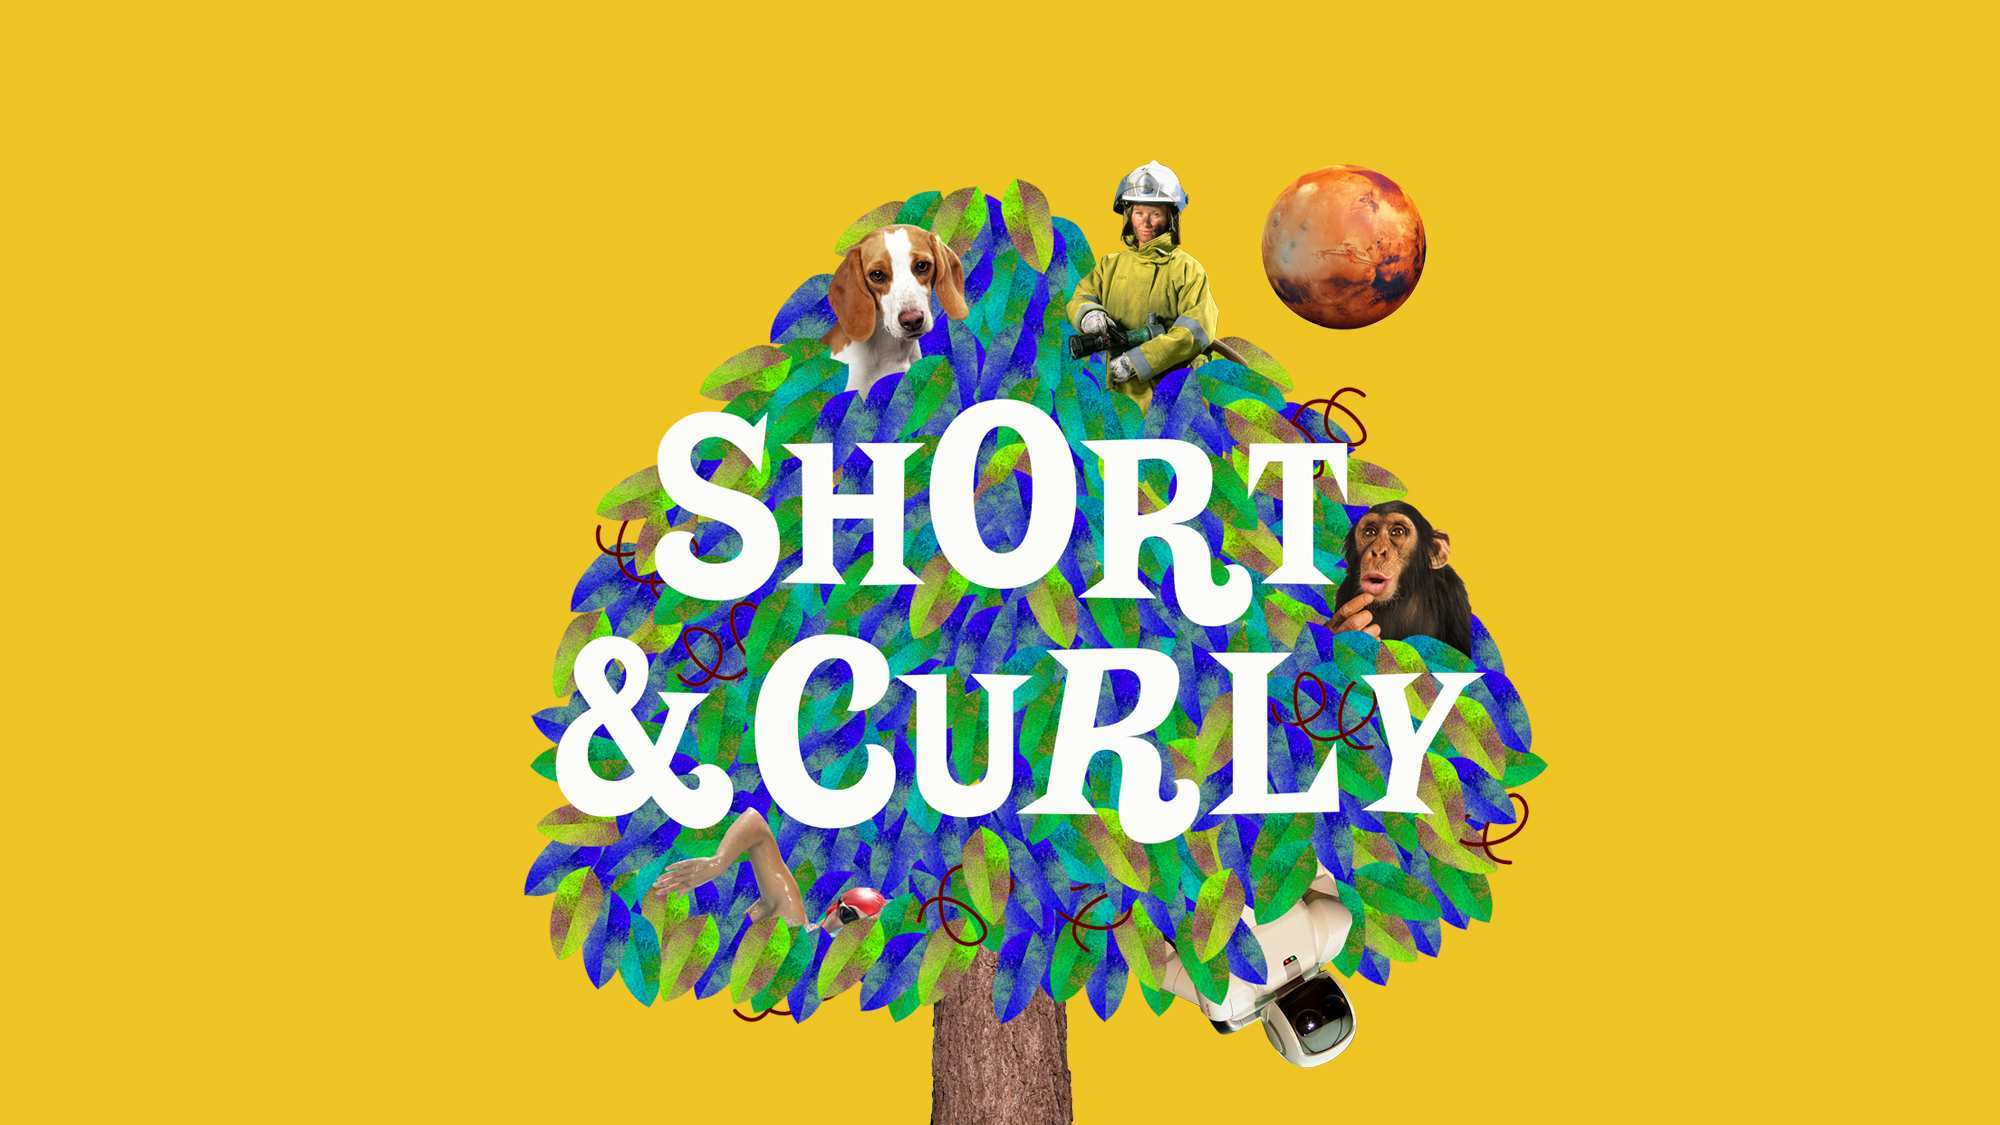 INTRODUCING — Short & Curly's big surprise!